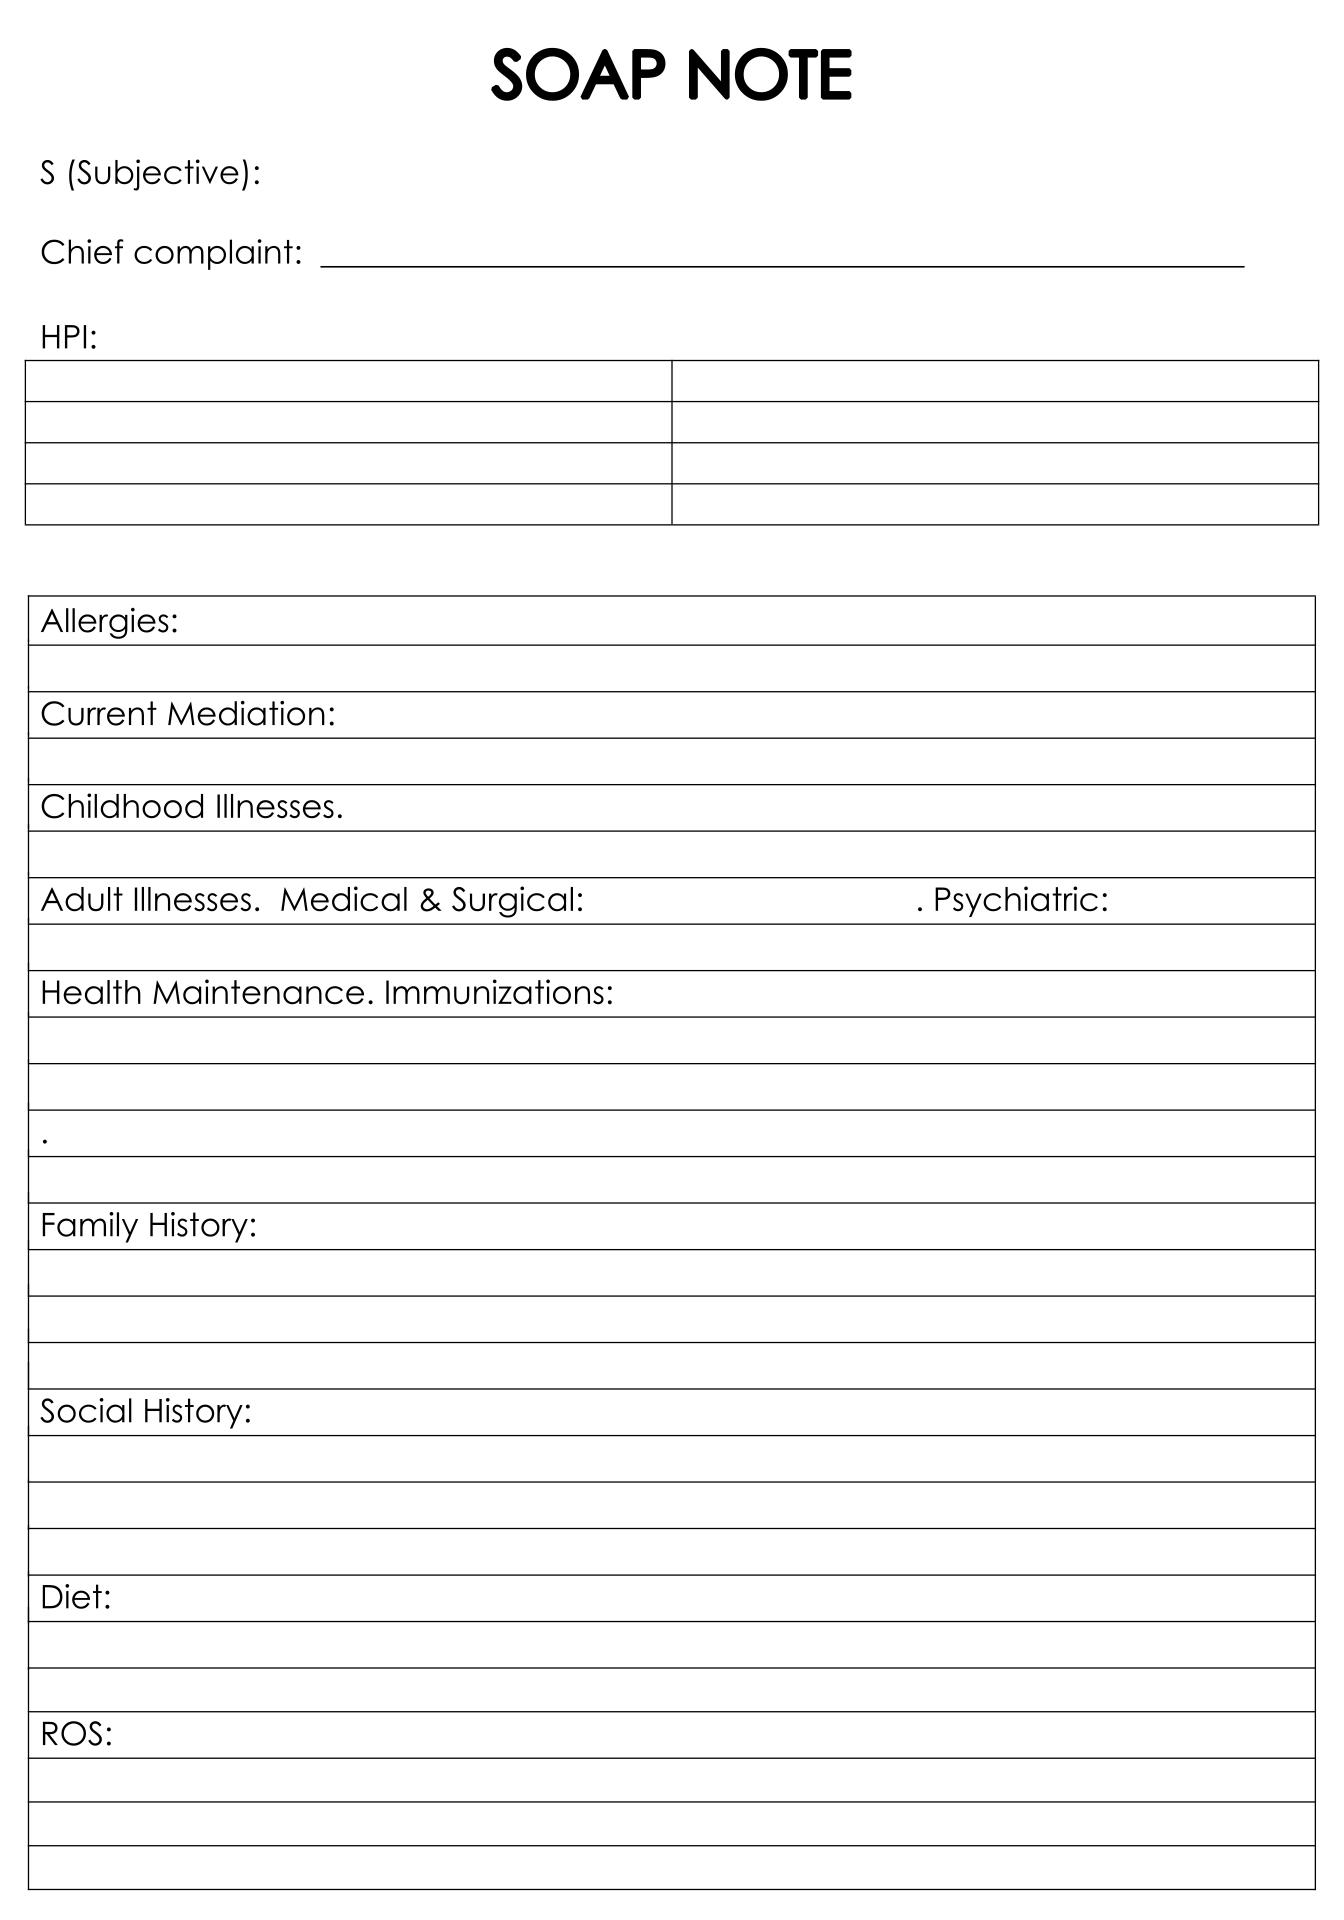 stationery-counselors-fillable-pdf-social-workers-soap-progress-note-template-for-therapists